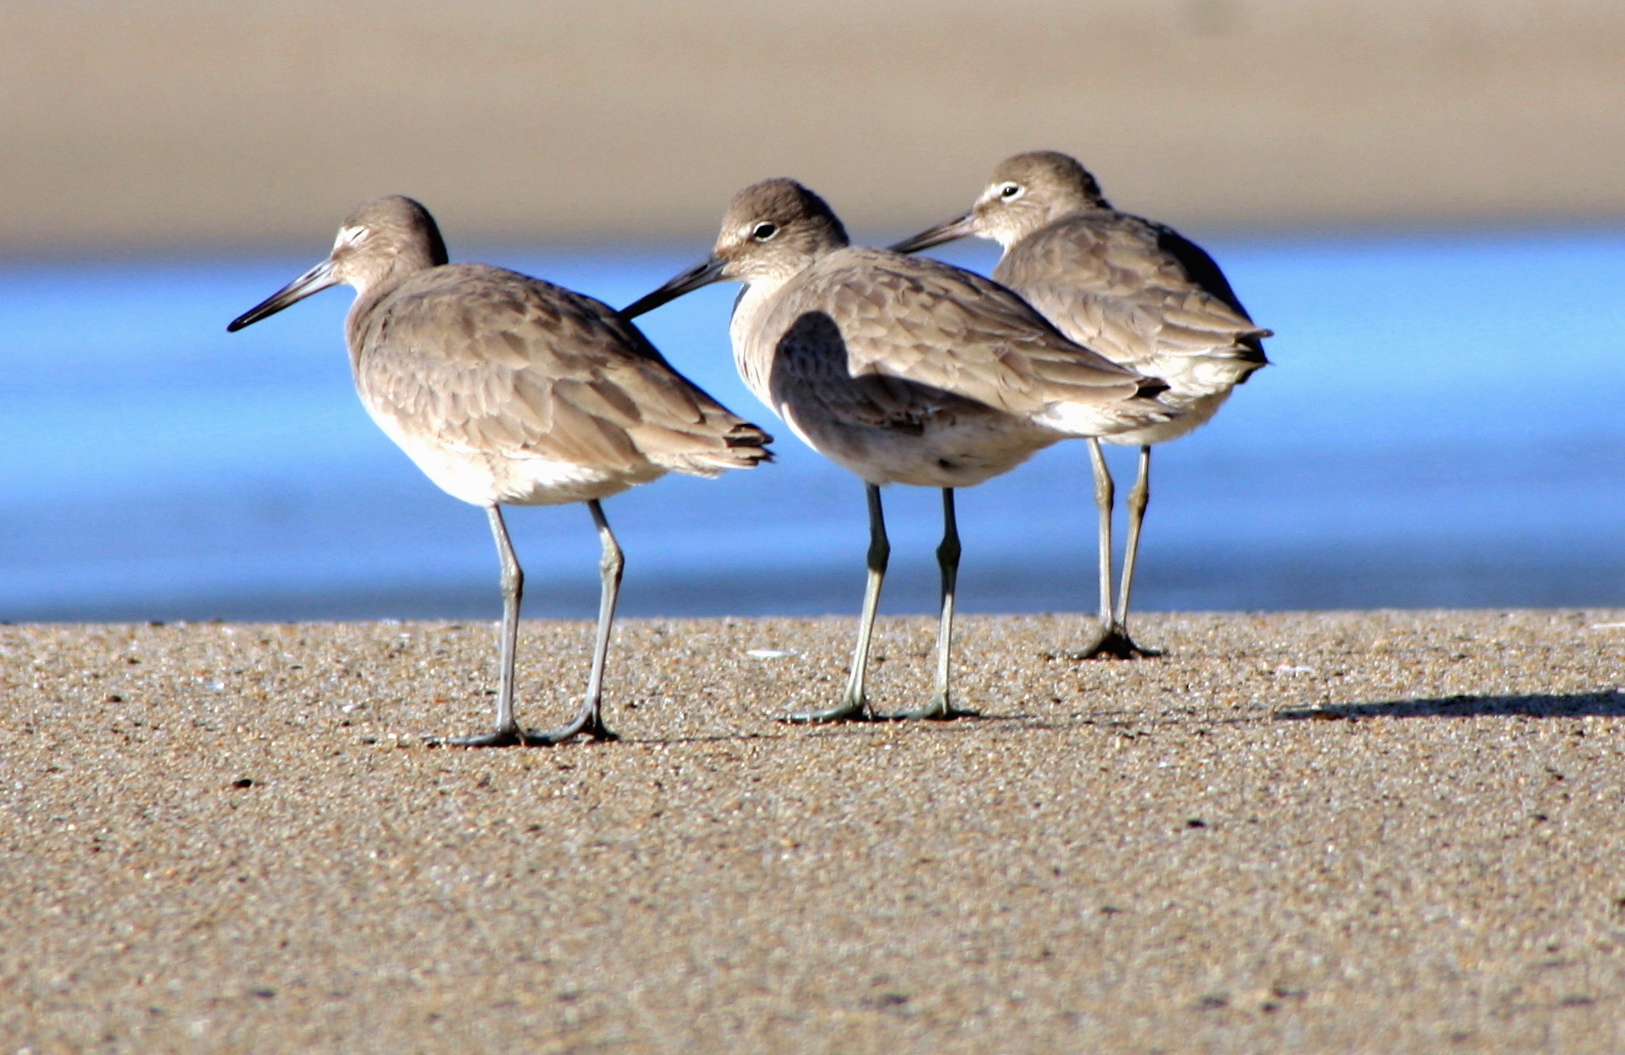 a group of three seagulls stand on the beach by water